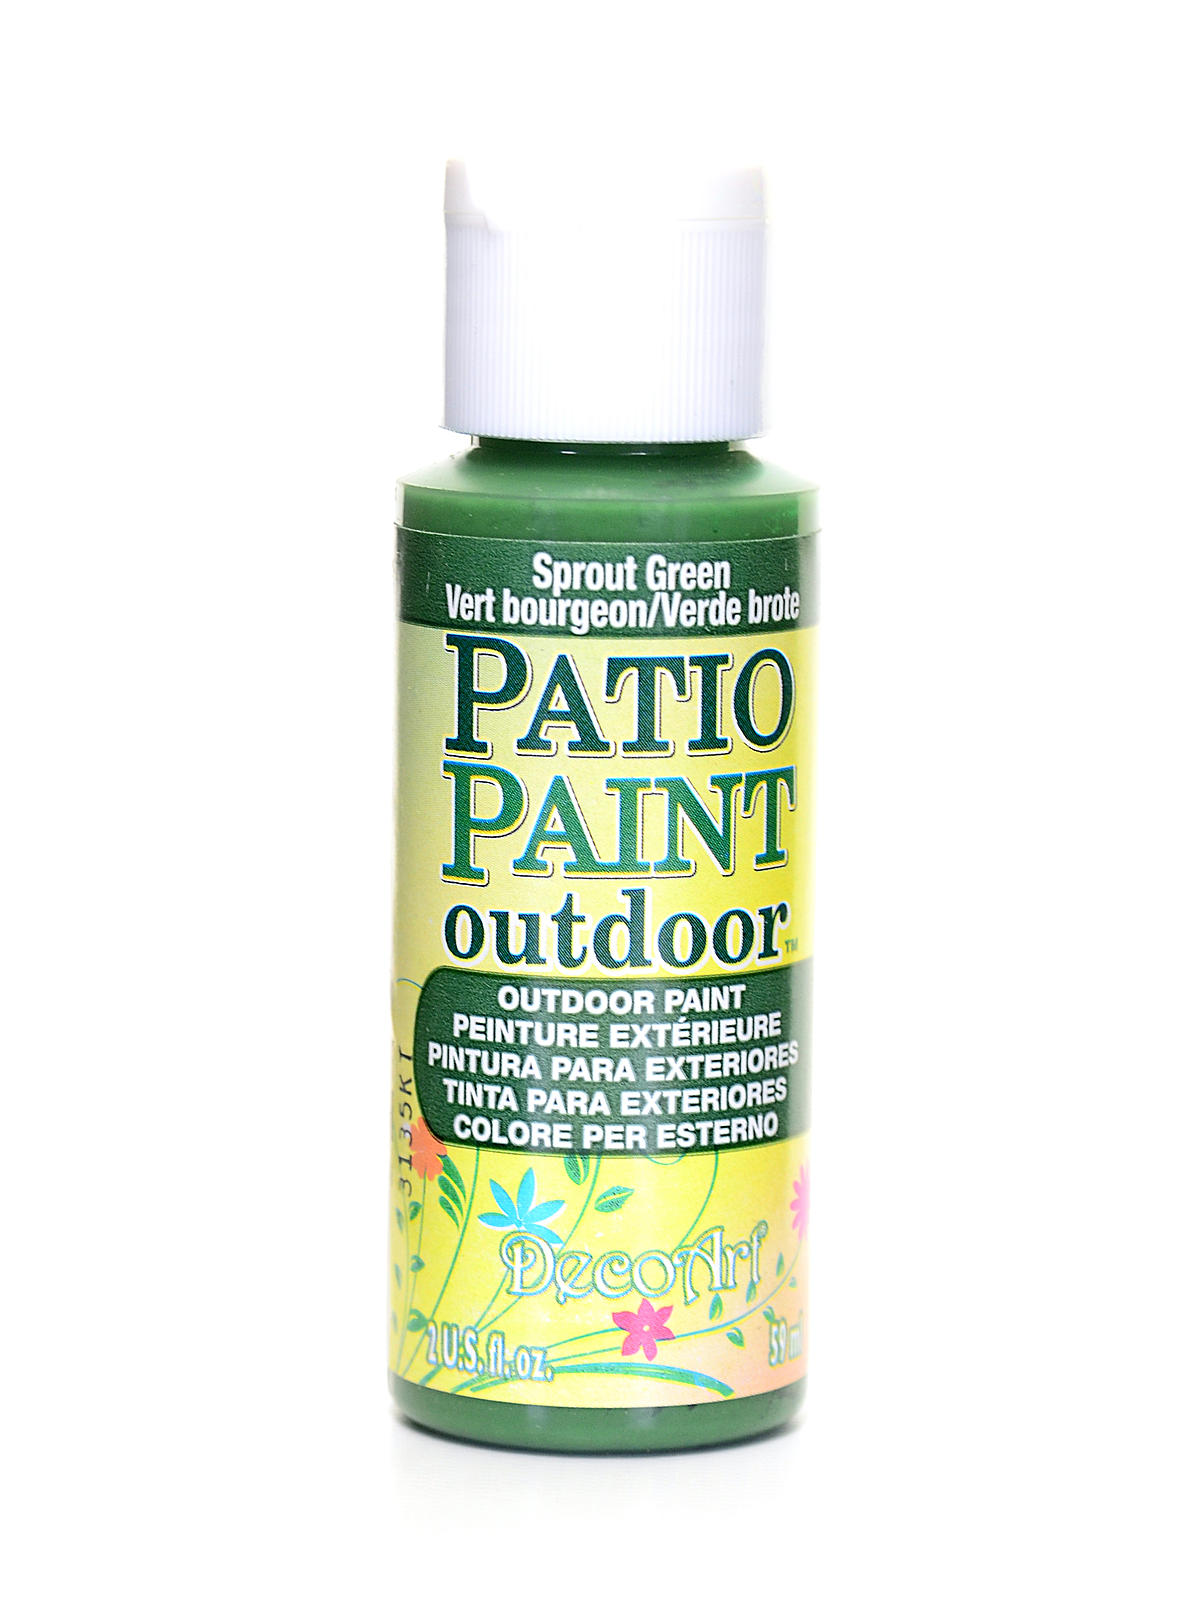 Patio Paint Sprout Green 2 Oz.